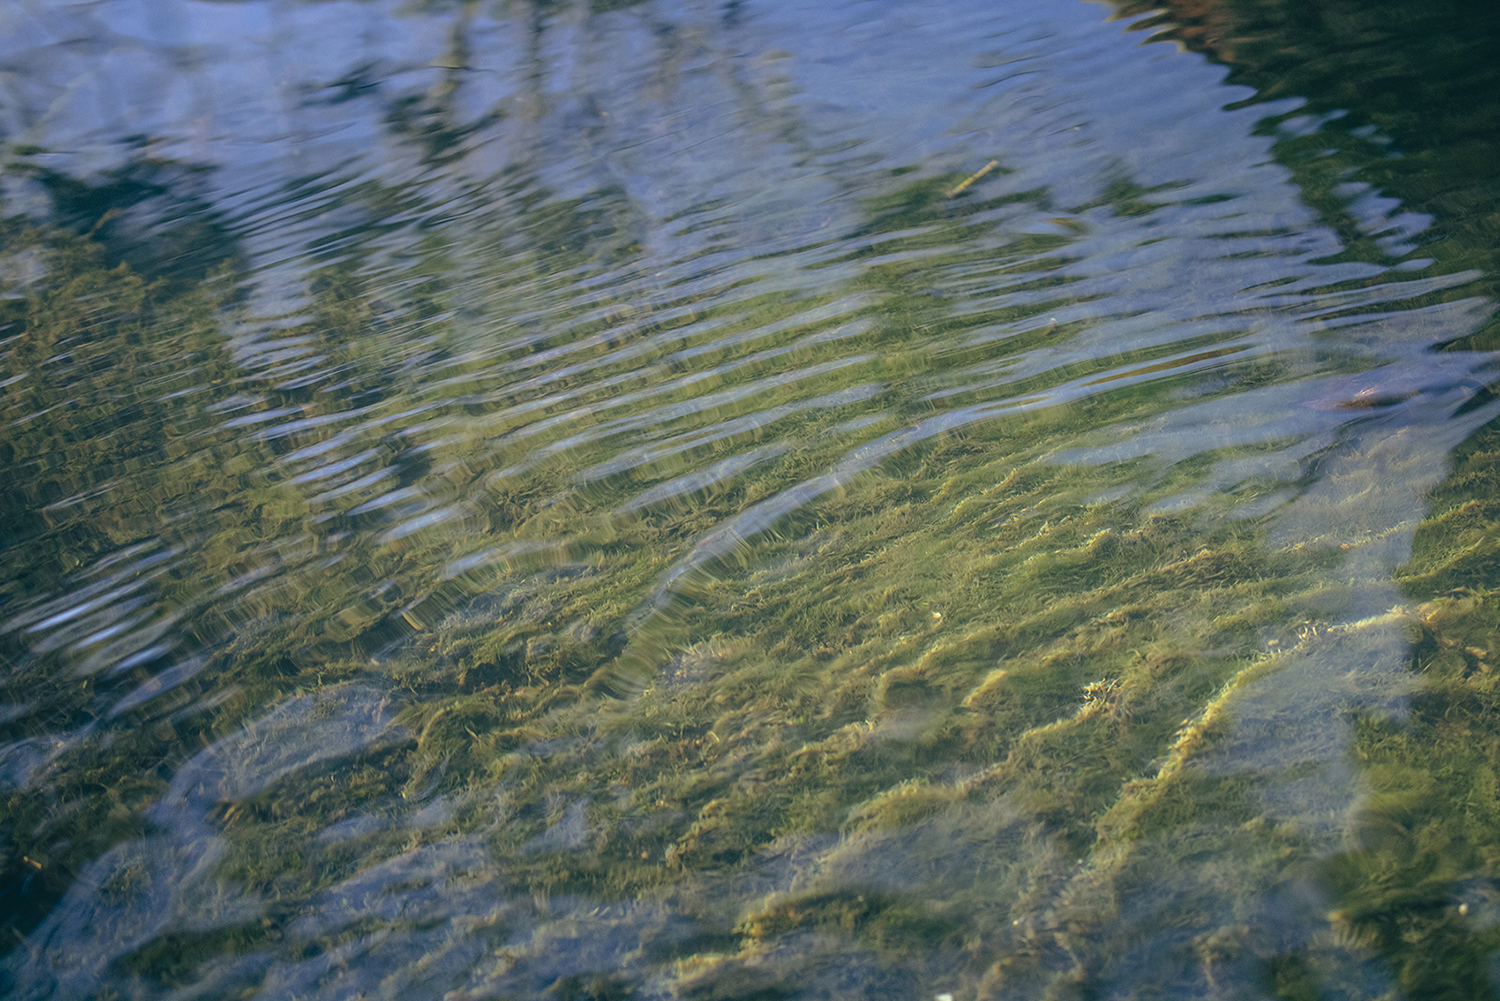 This image by BA Photography student, Amelia Boyles, shows a river with ripples glistening in the sunlight.